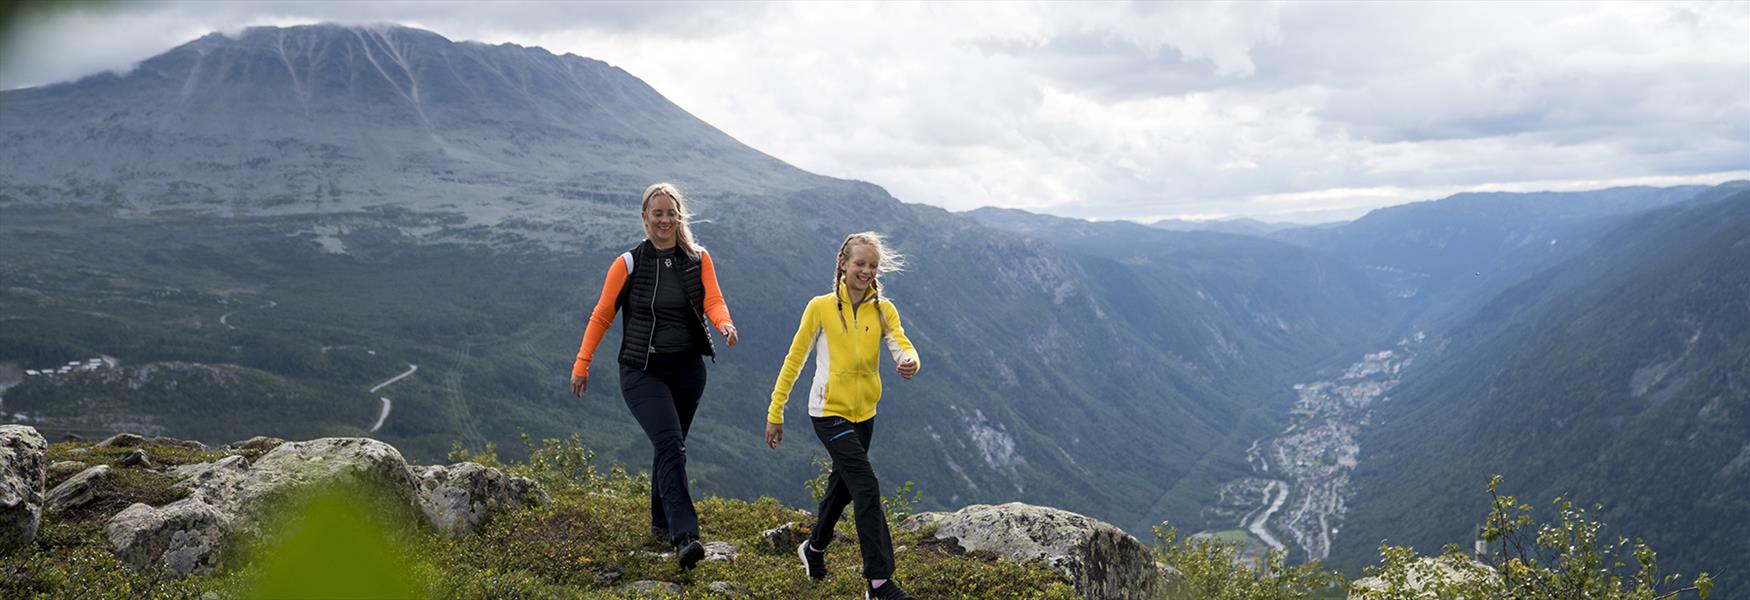 Enjoy hiking in the Mountains of Telemark